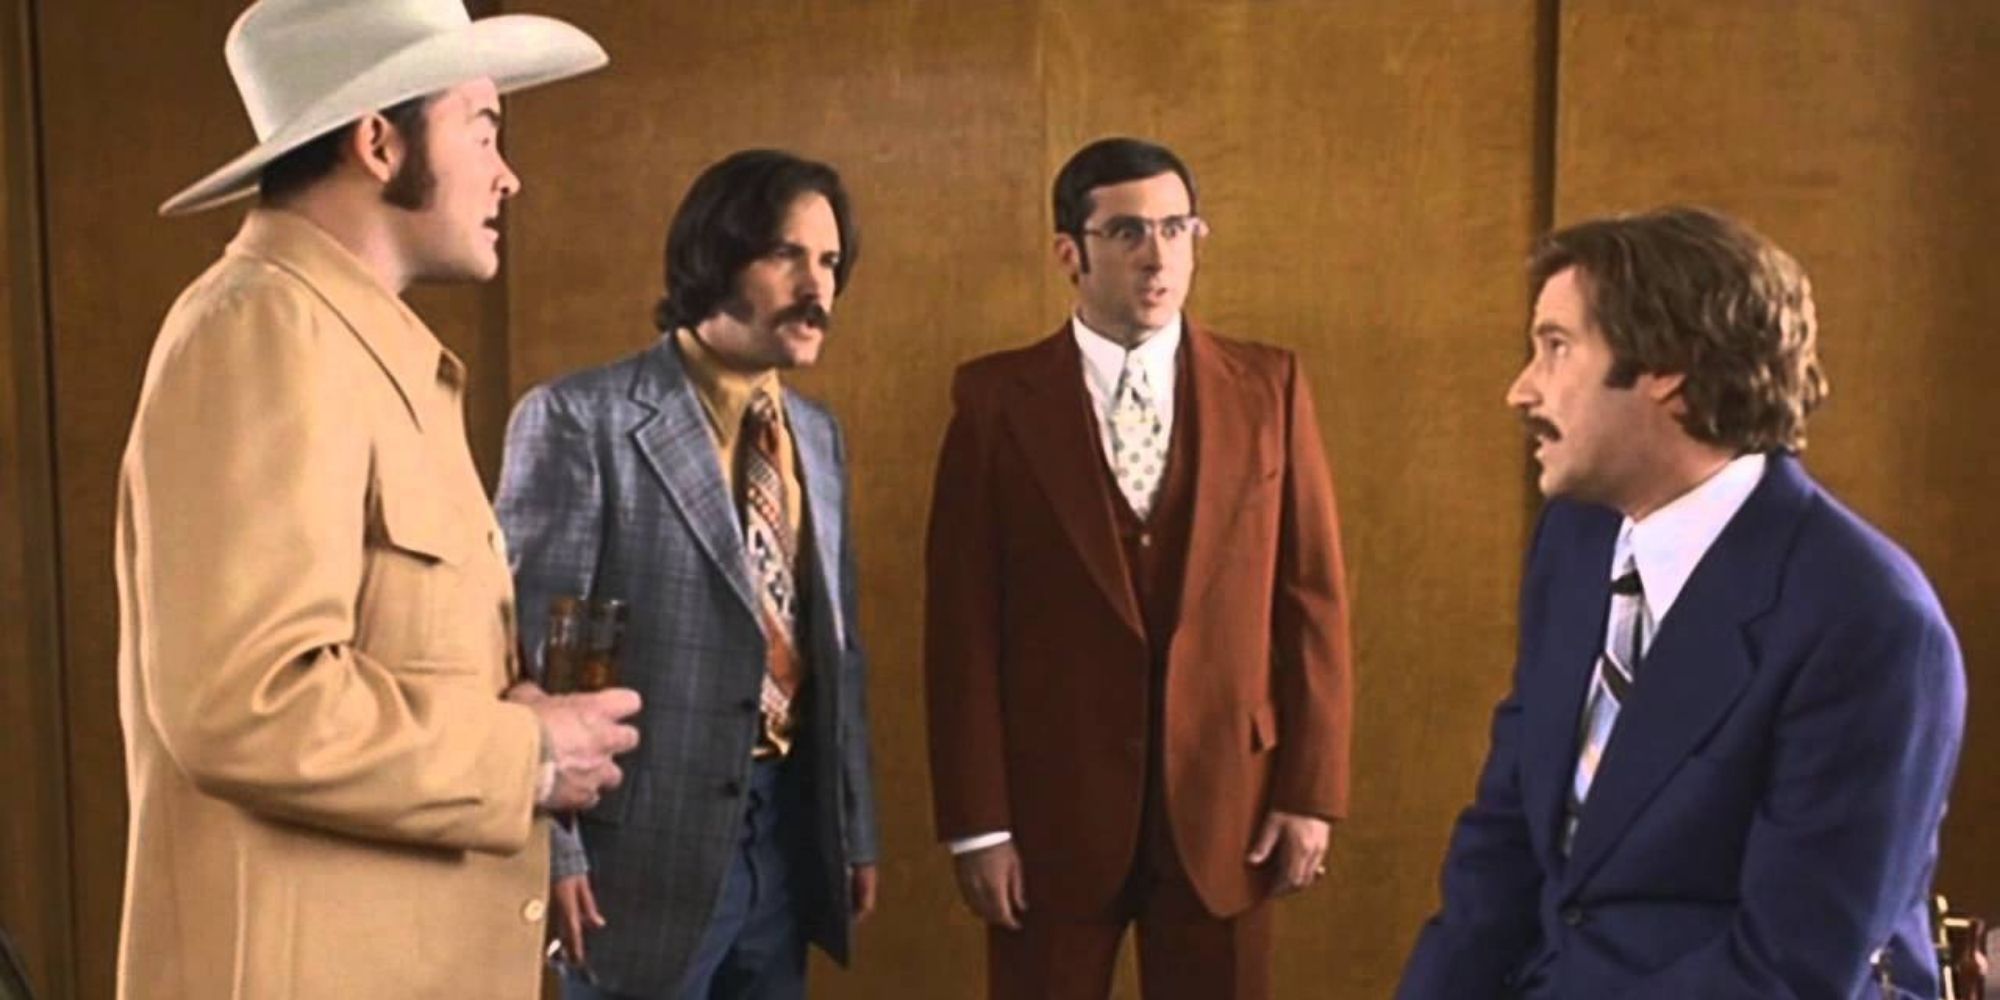 Afteroon Delight sequence in Anchorman